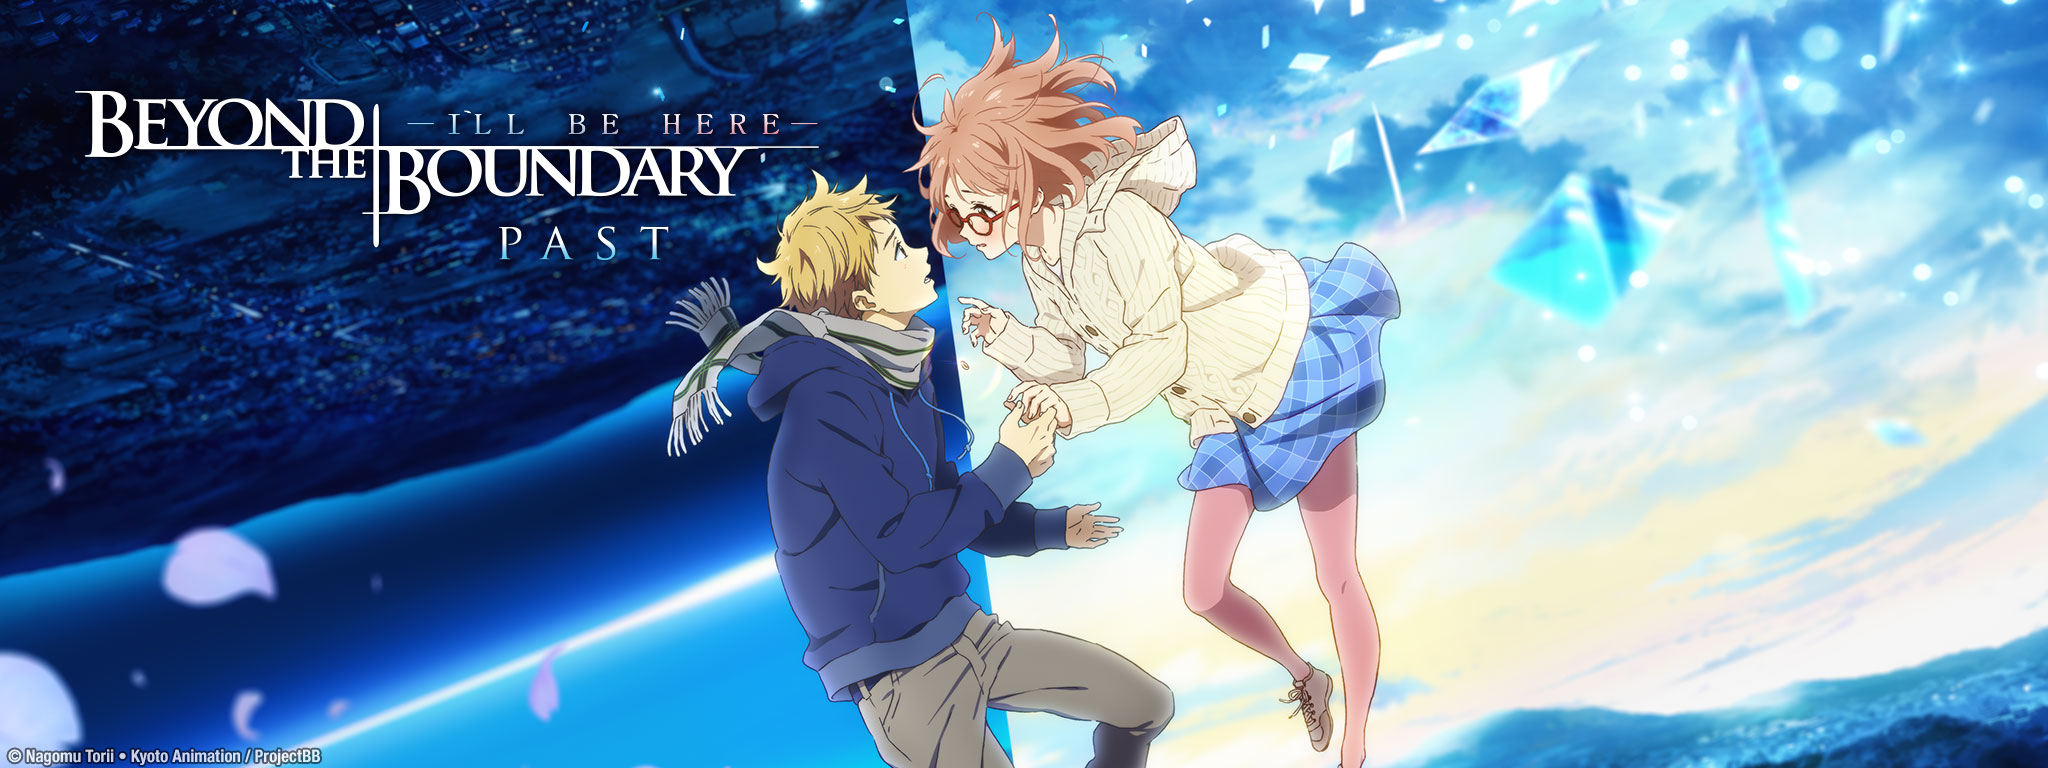 Beyond the Boundary: I'll Be Here - Future (2015)